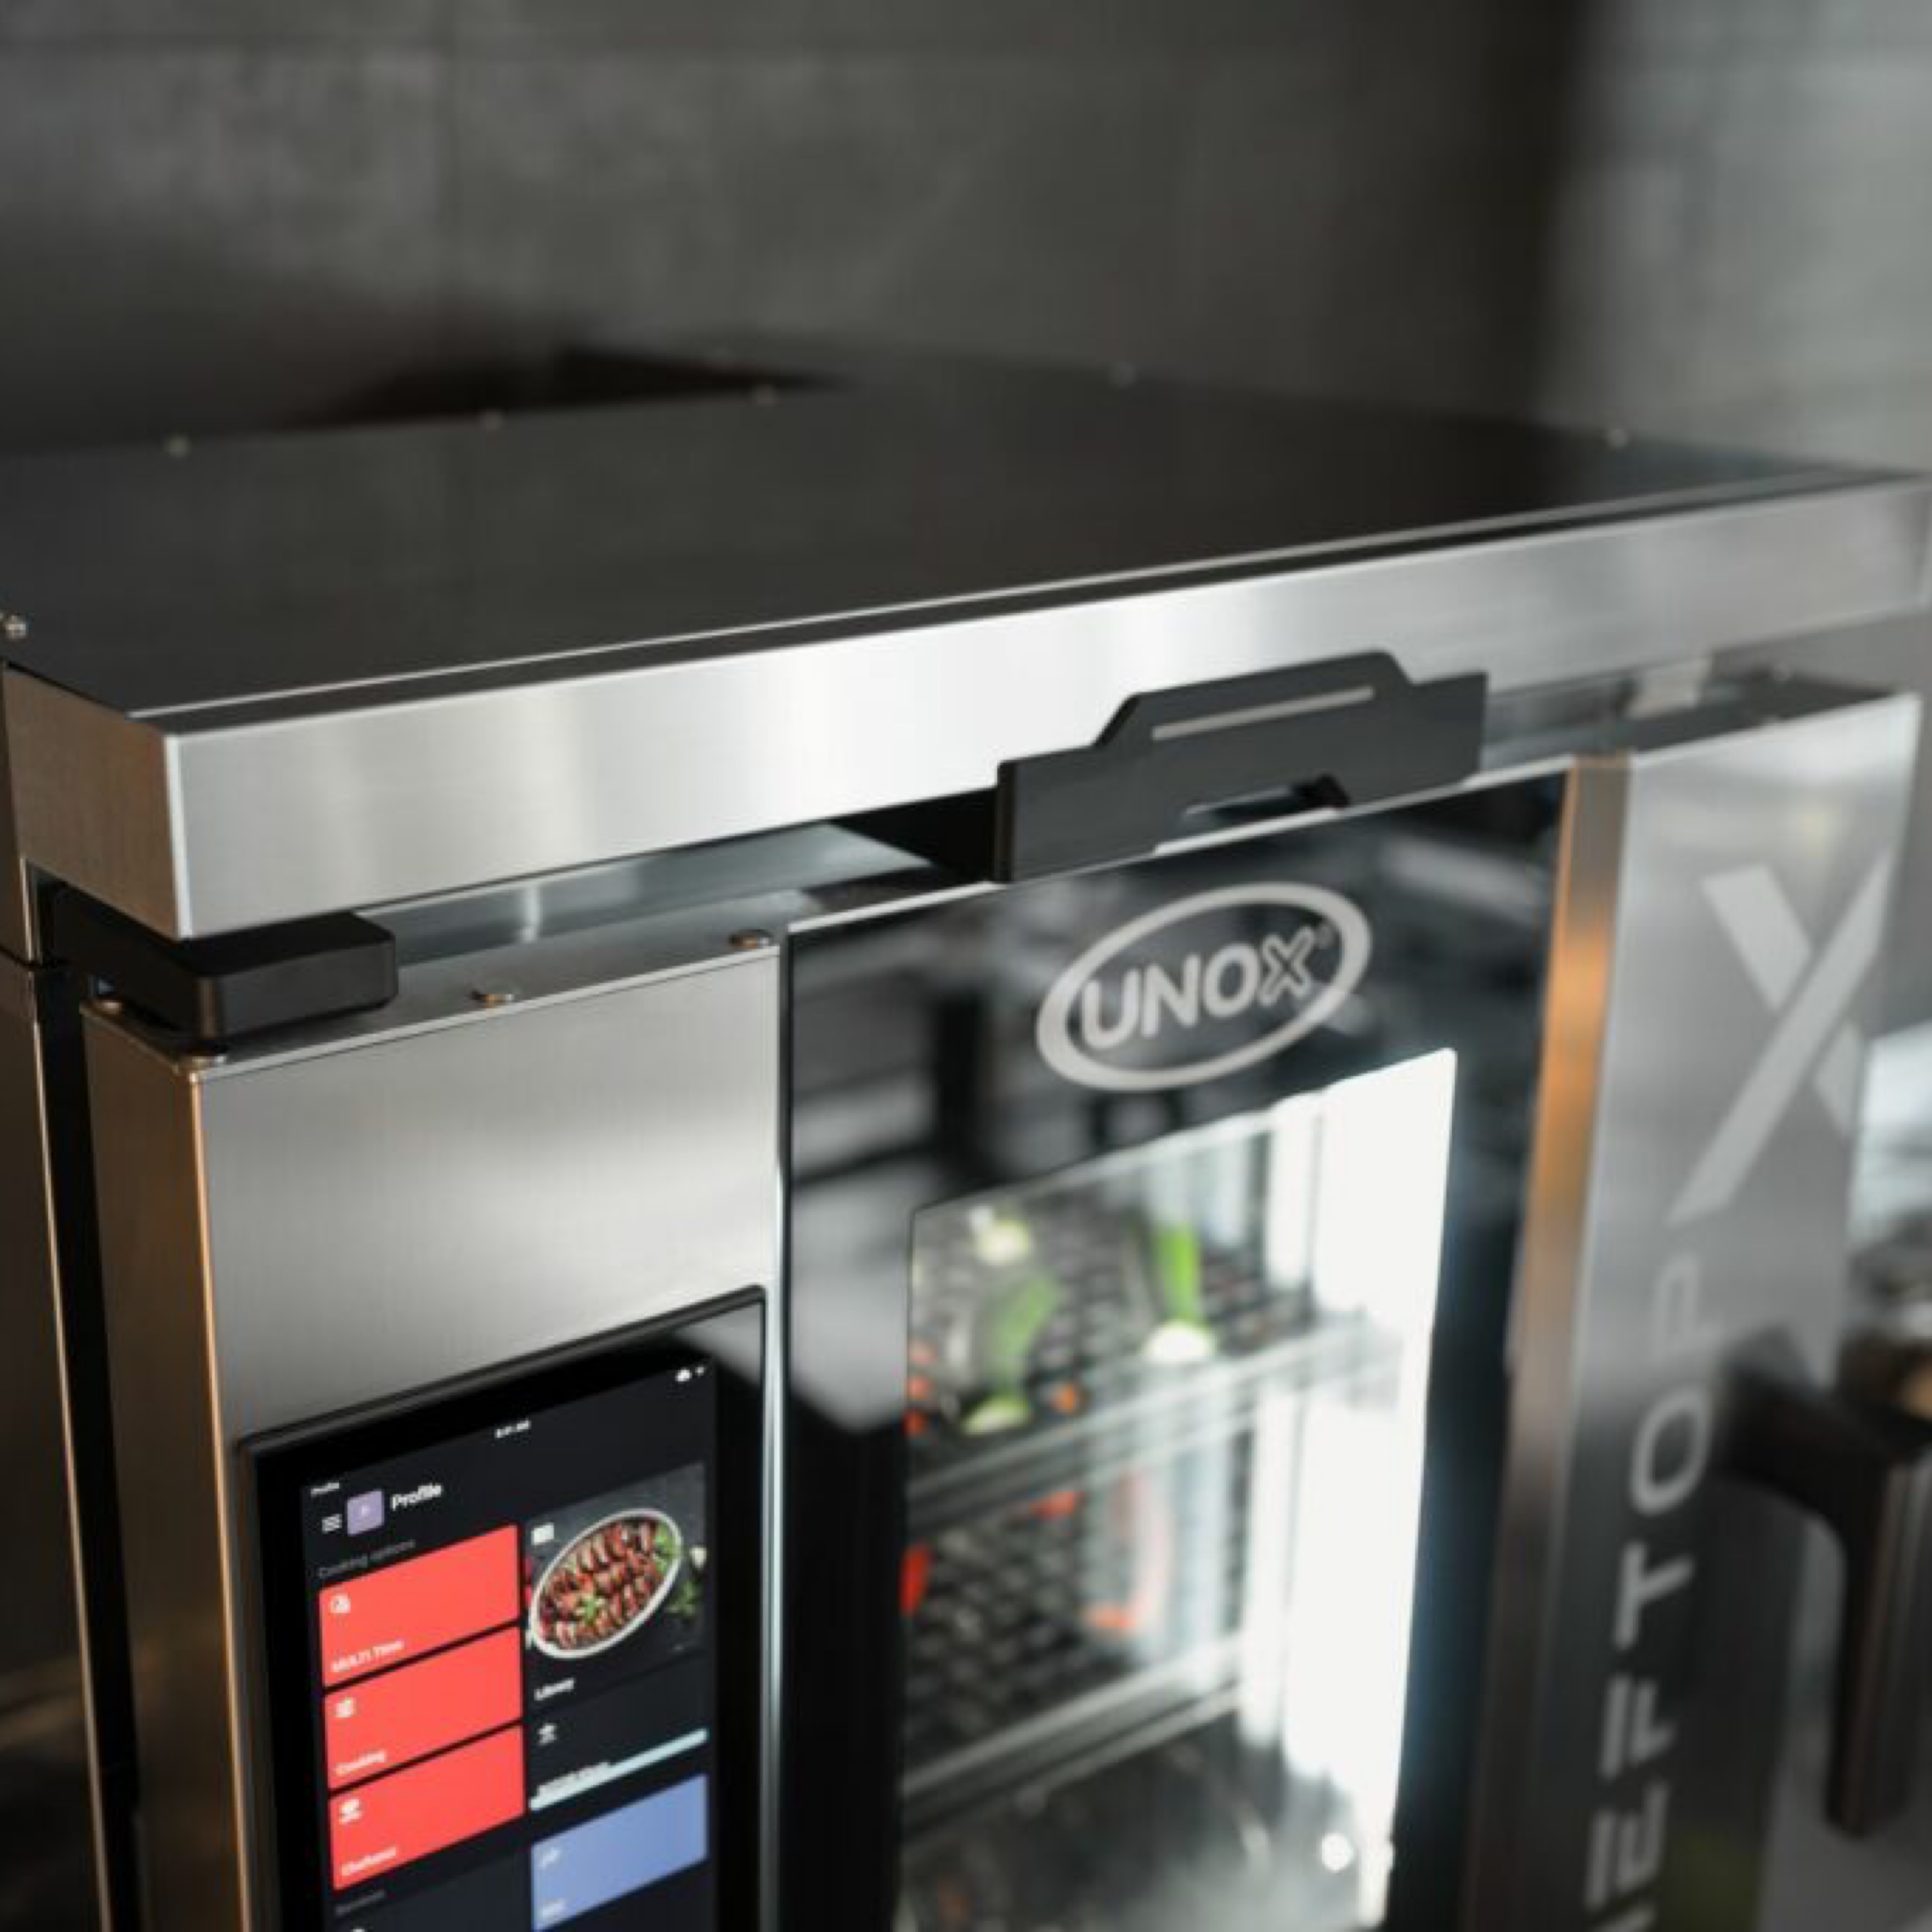 Moving Menus Forward With Combi Oven Innovation